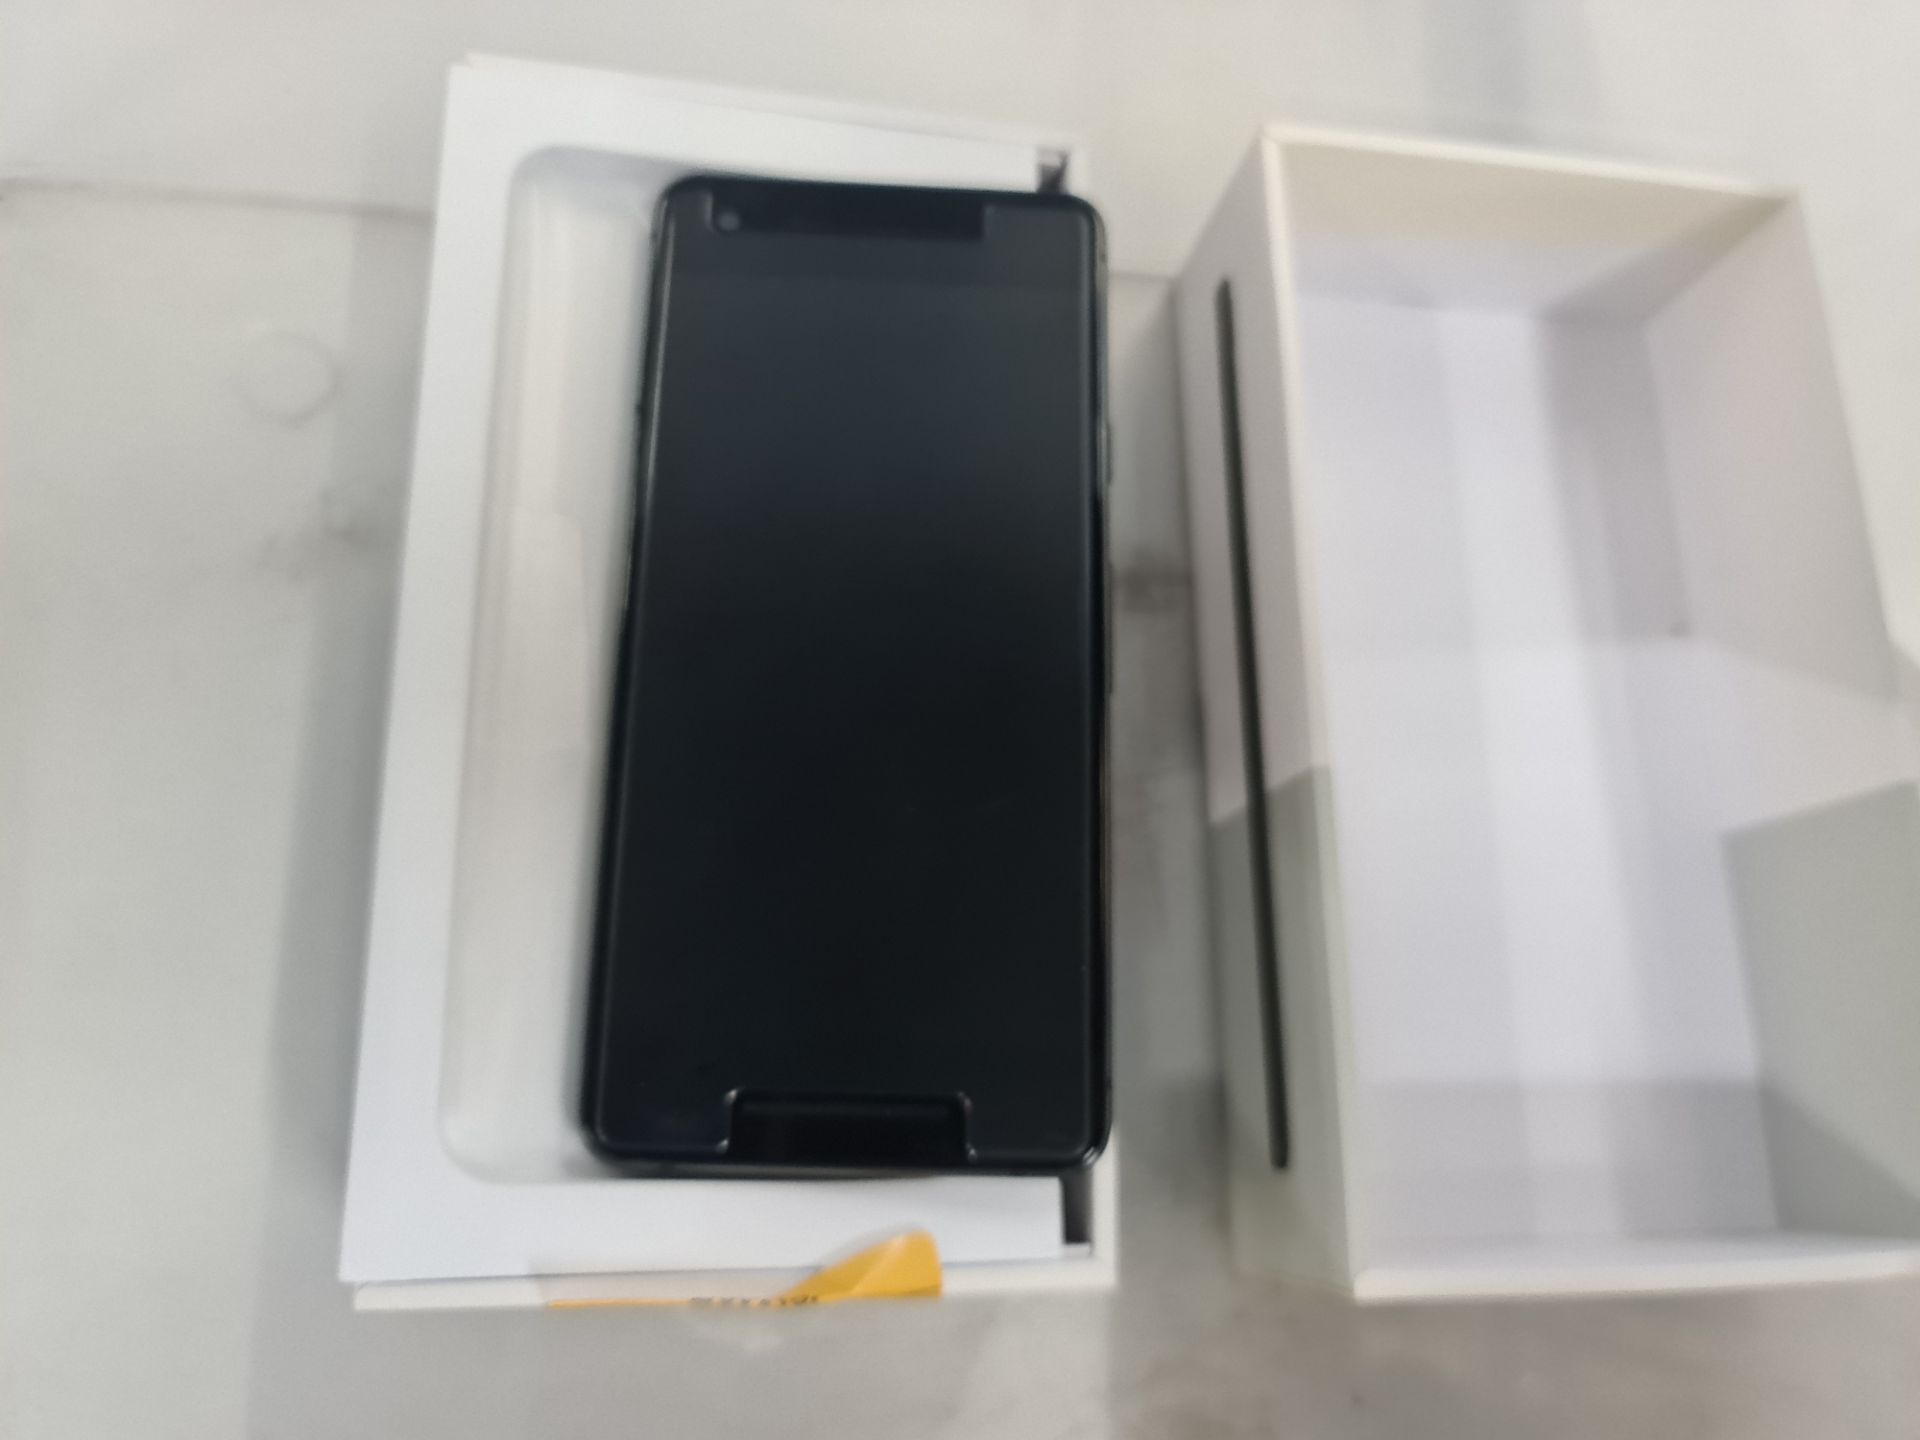 Google Pixel 2 mobile phone with box. - Image 8 of 11